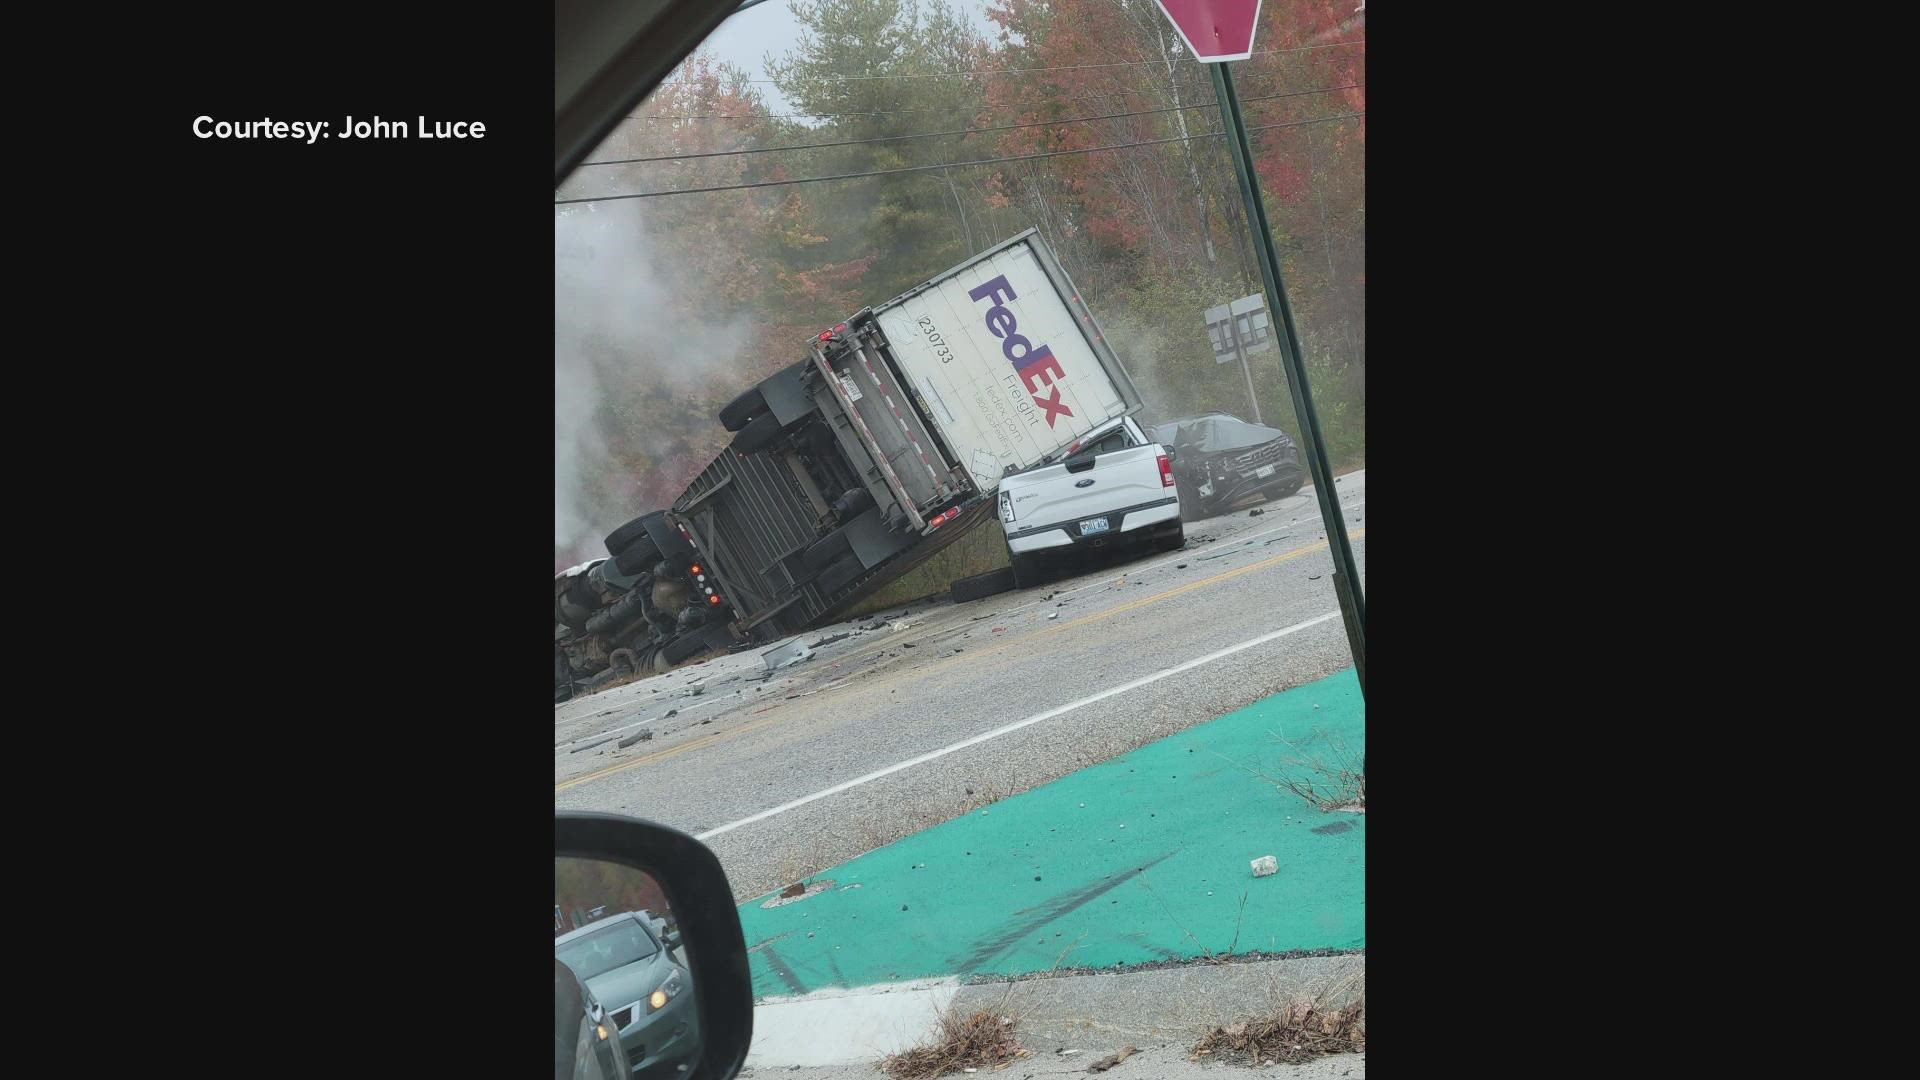 Emergency personnel responded to the scene on Route 26 around 9:49 a.m. Tuesday.